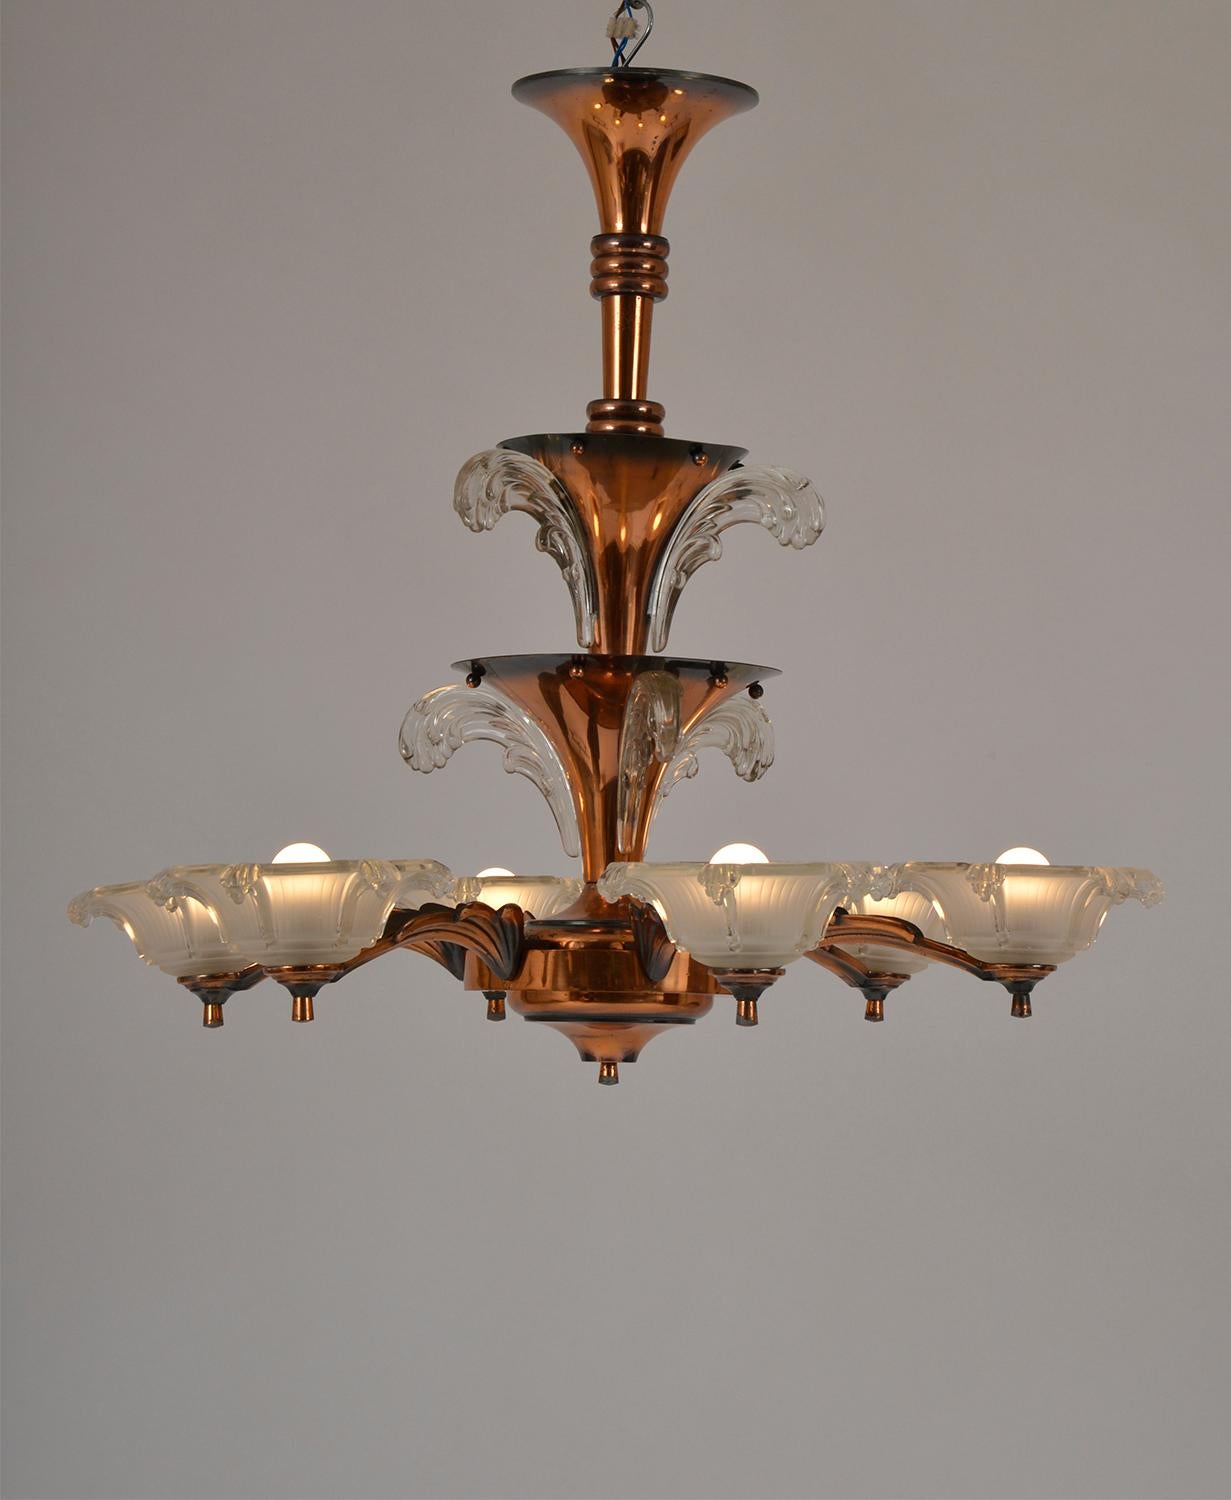 1930s French Art Deco 6-Arm Chandelier by Petitot and Ezan Copper and Glass For Sale 7